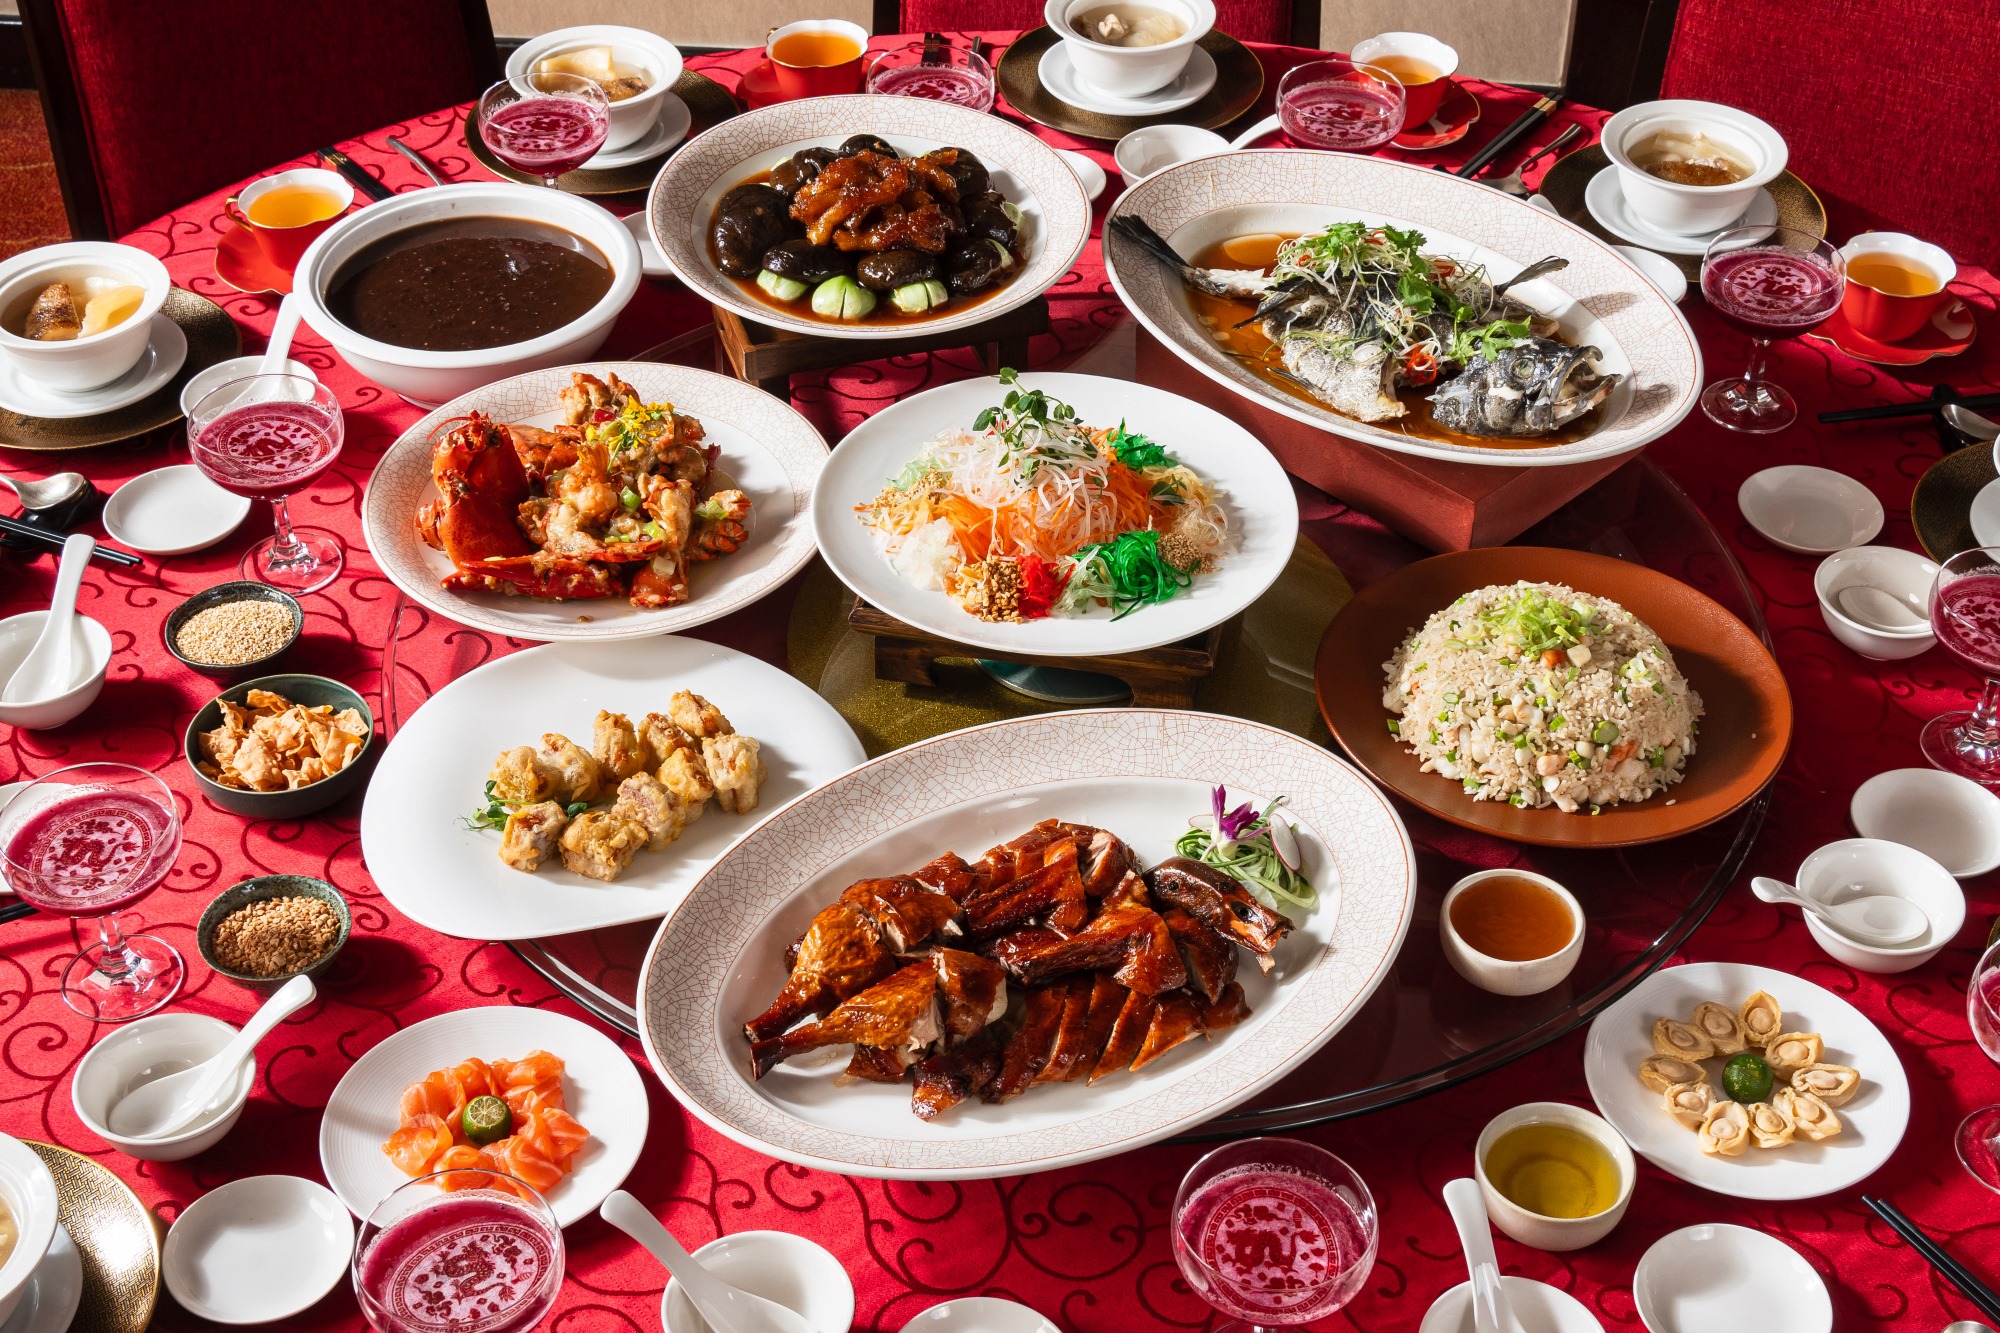 Shang Palace curates an authentic oriental experience through their Chinese New Year offerings